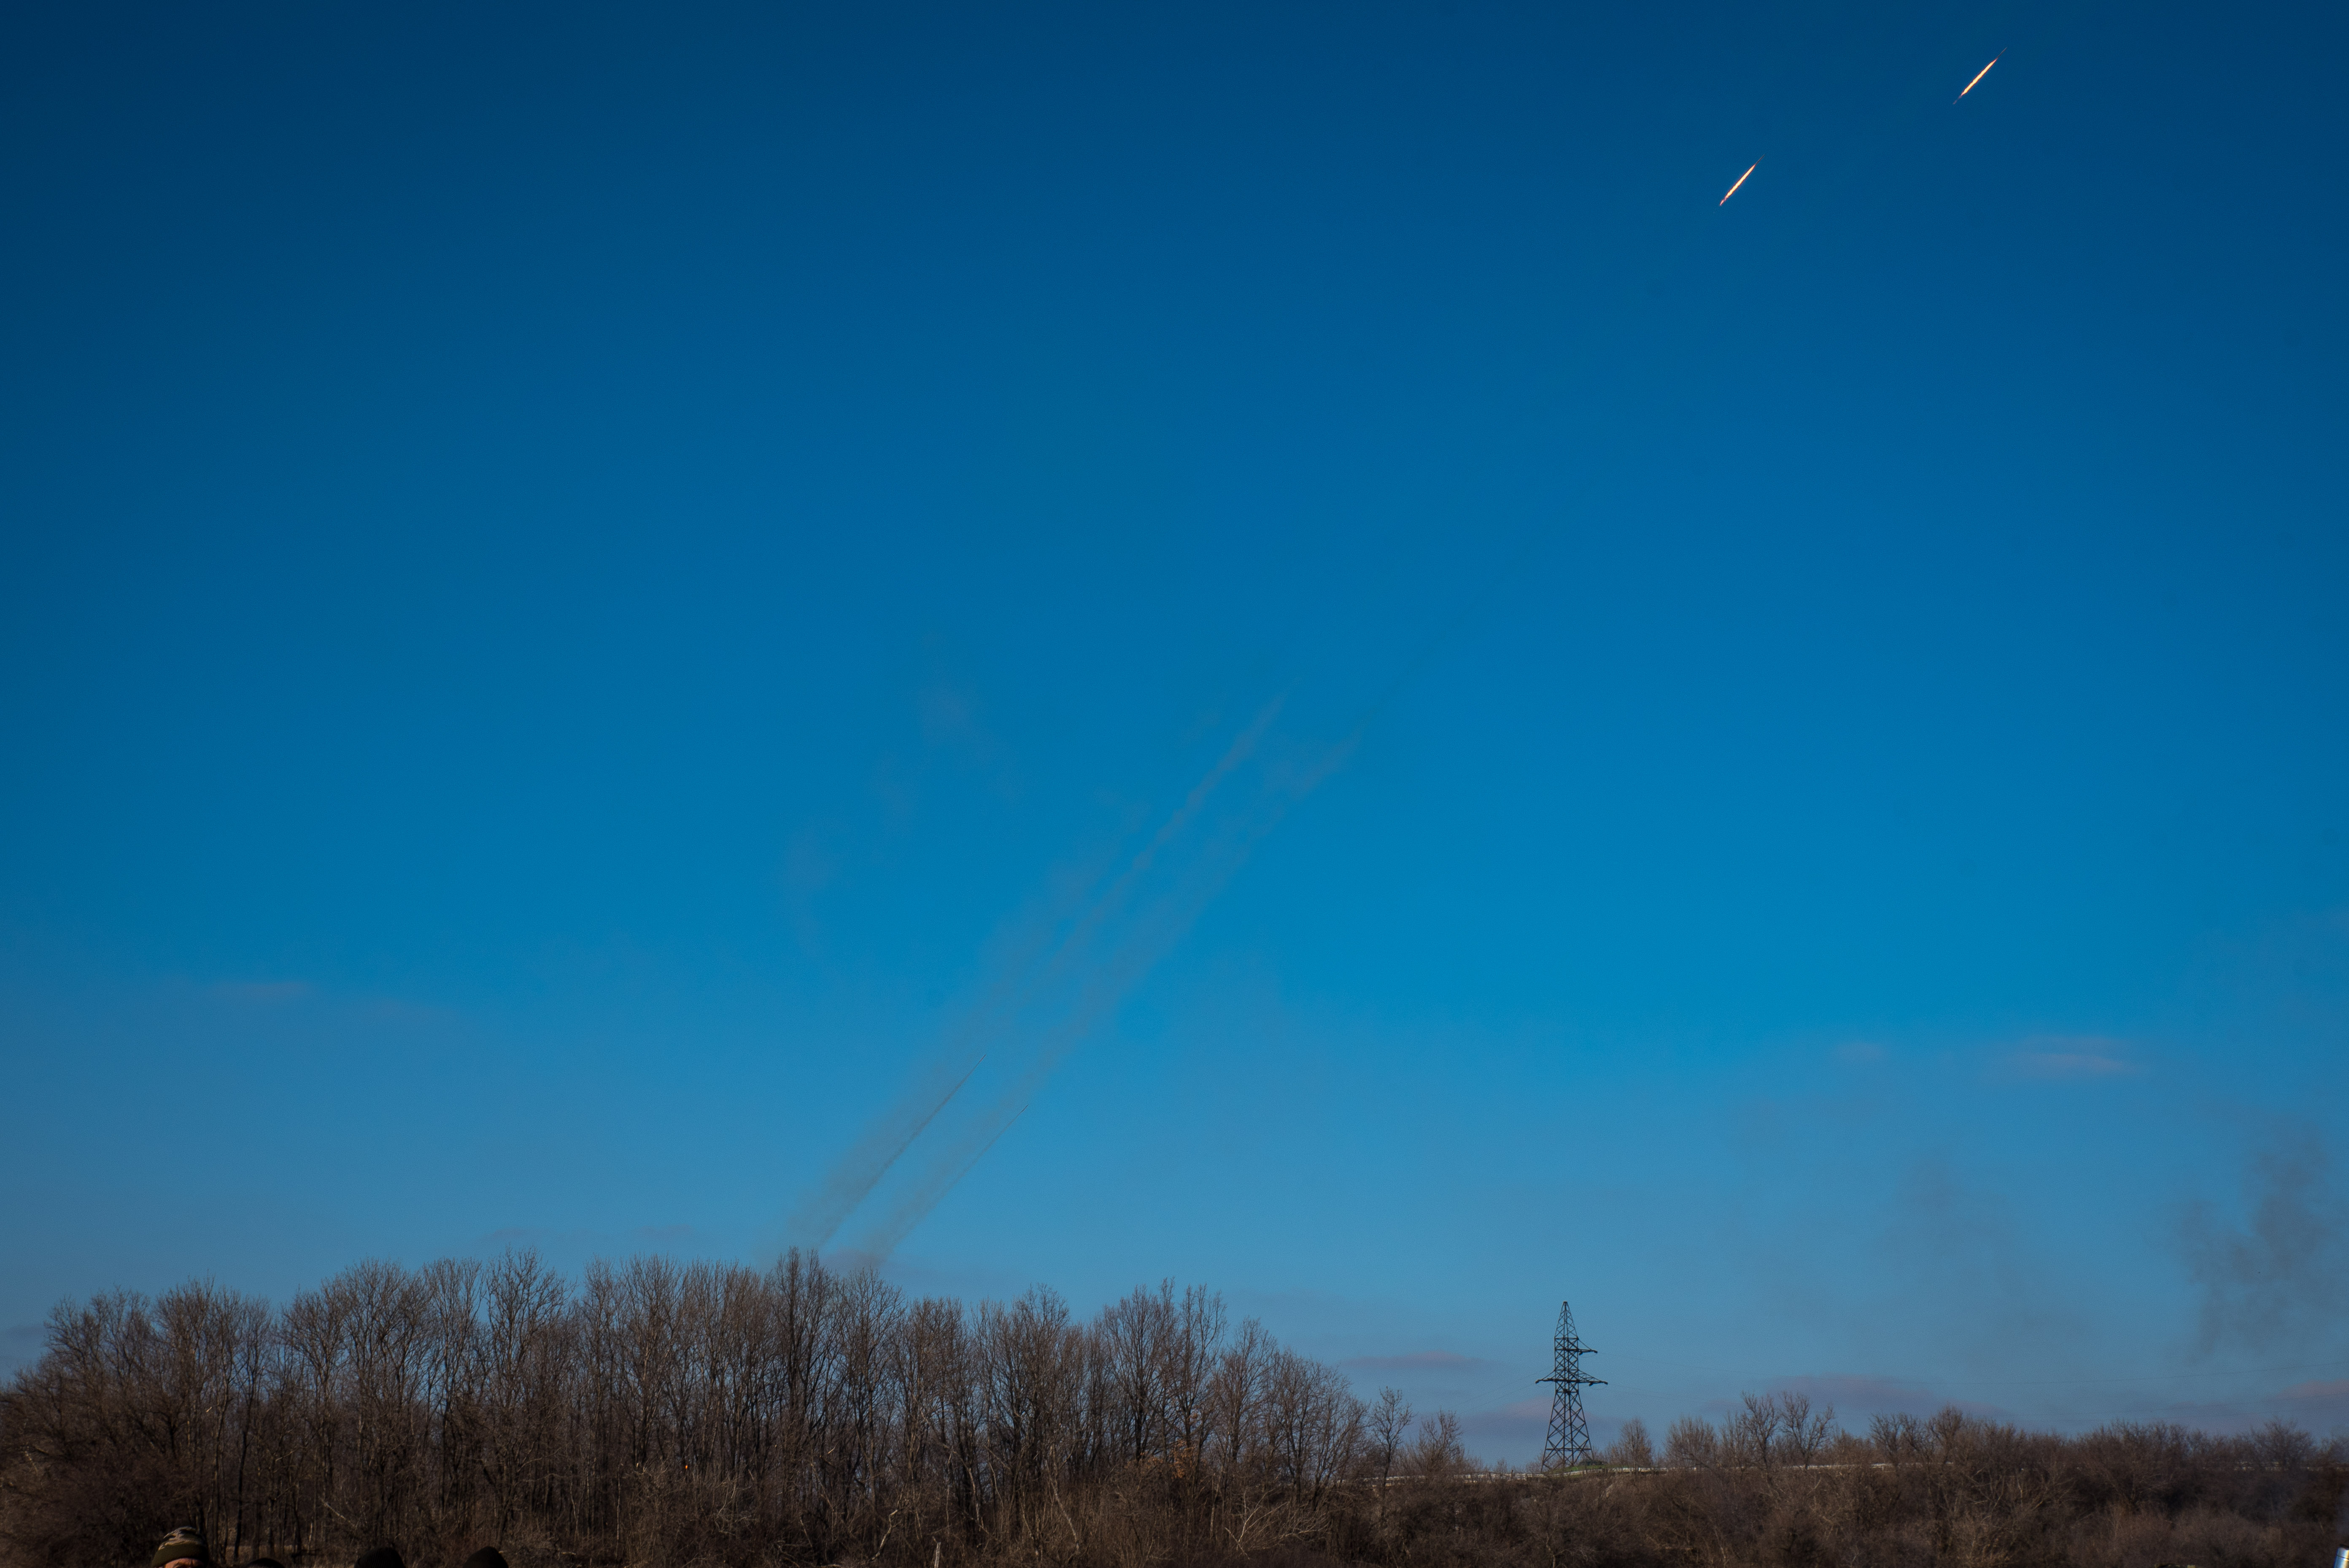 2/20: Ukrainians fire Grad rockets into Debaltseve after its occupation by pro-Russian separatist forces. Always good to keep in mind that rocket strikes usually illicit a response. (Photo Credit: James Sprankle)